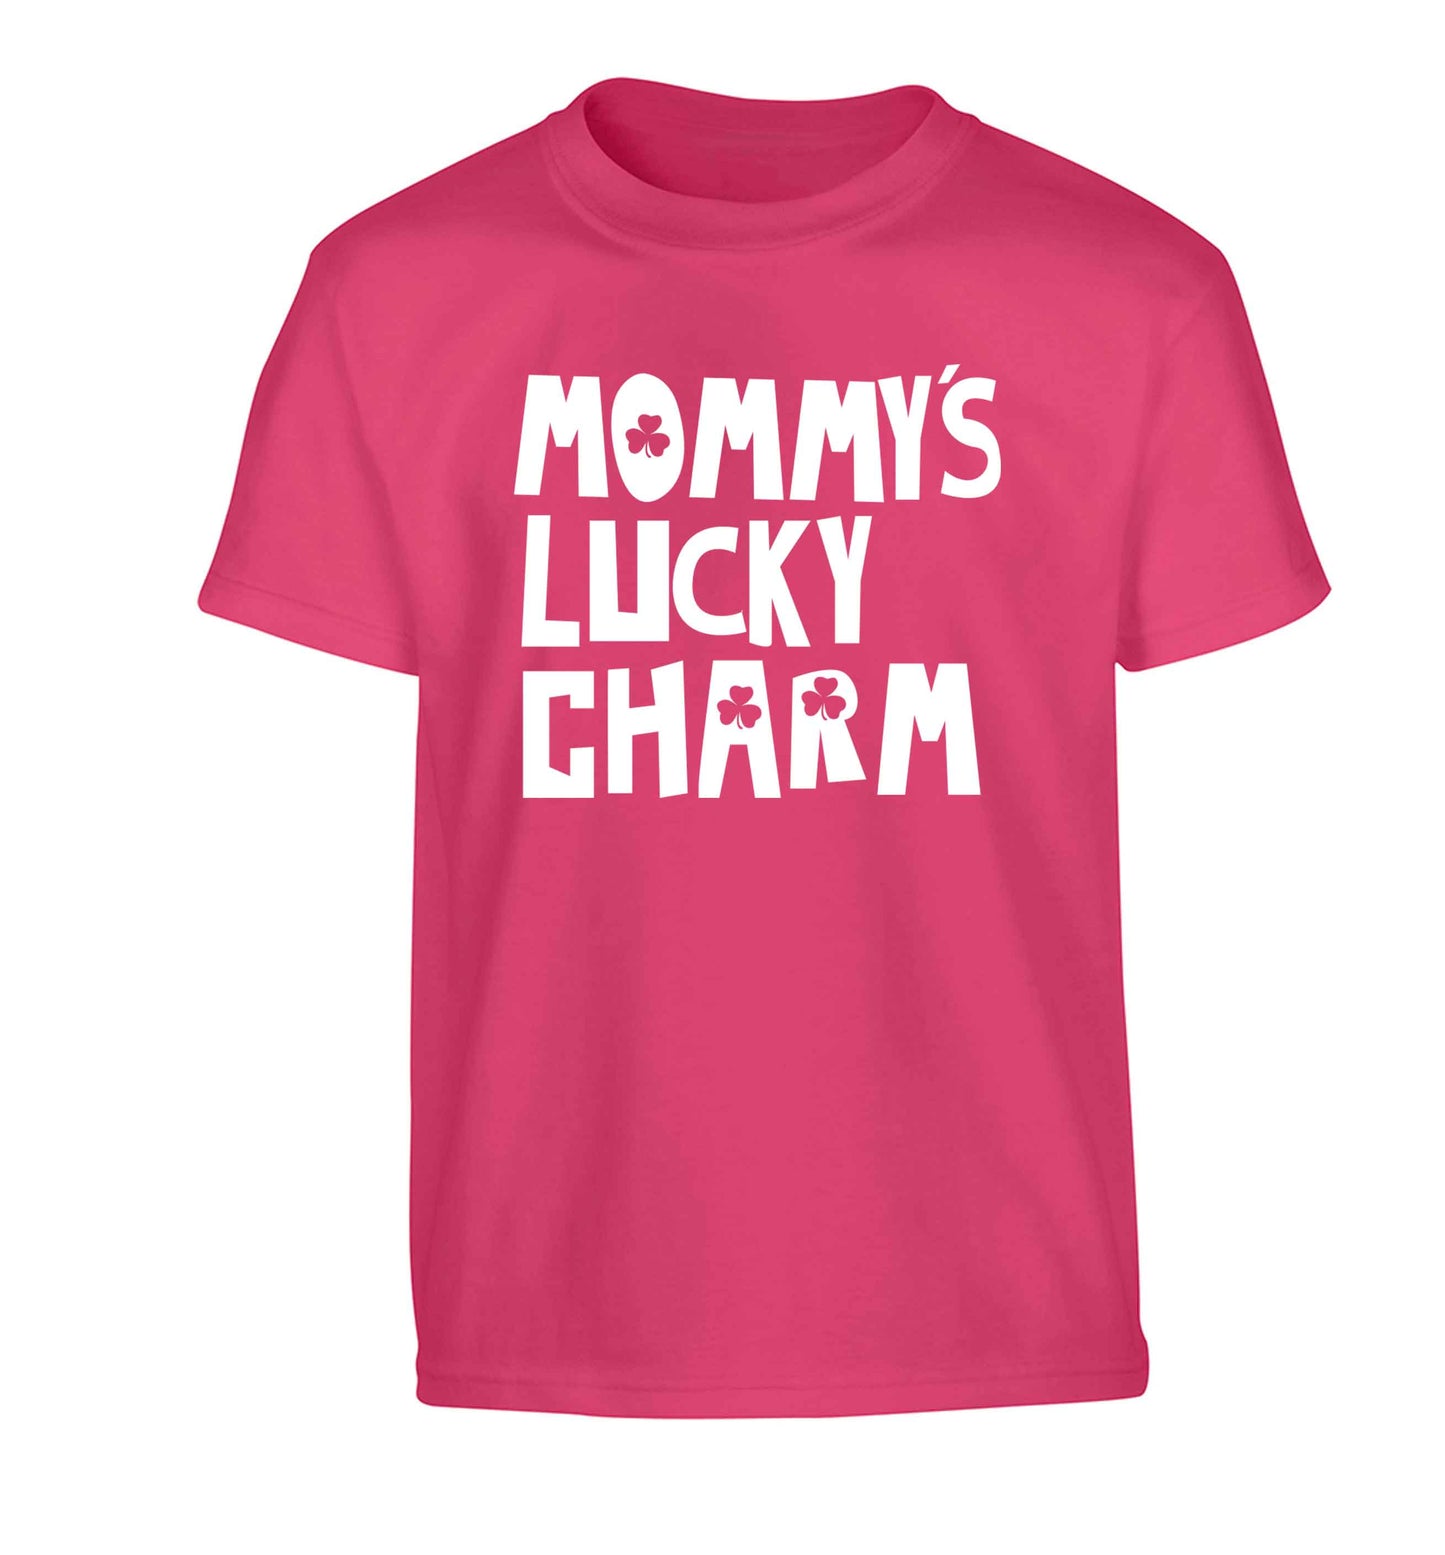 Mommy's lucky charm Children's pink Tshirt 12-13 Years